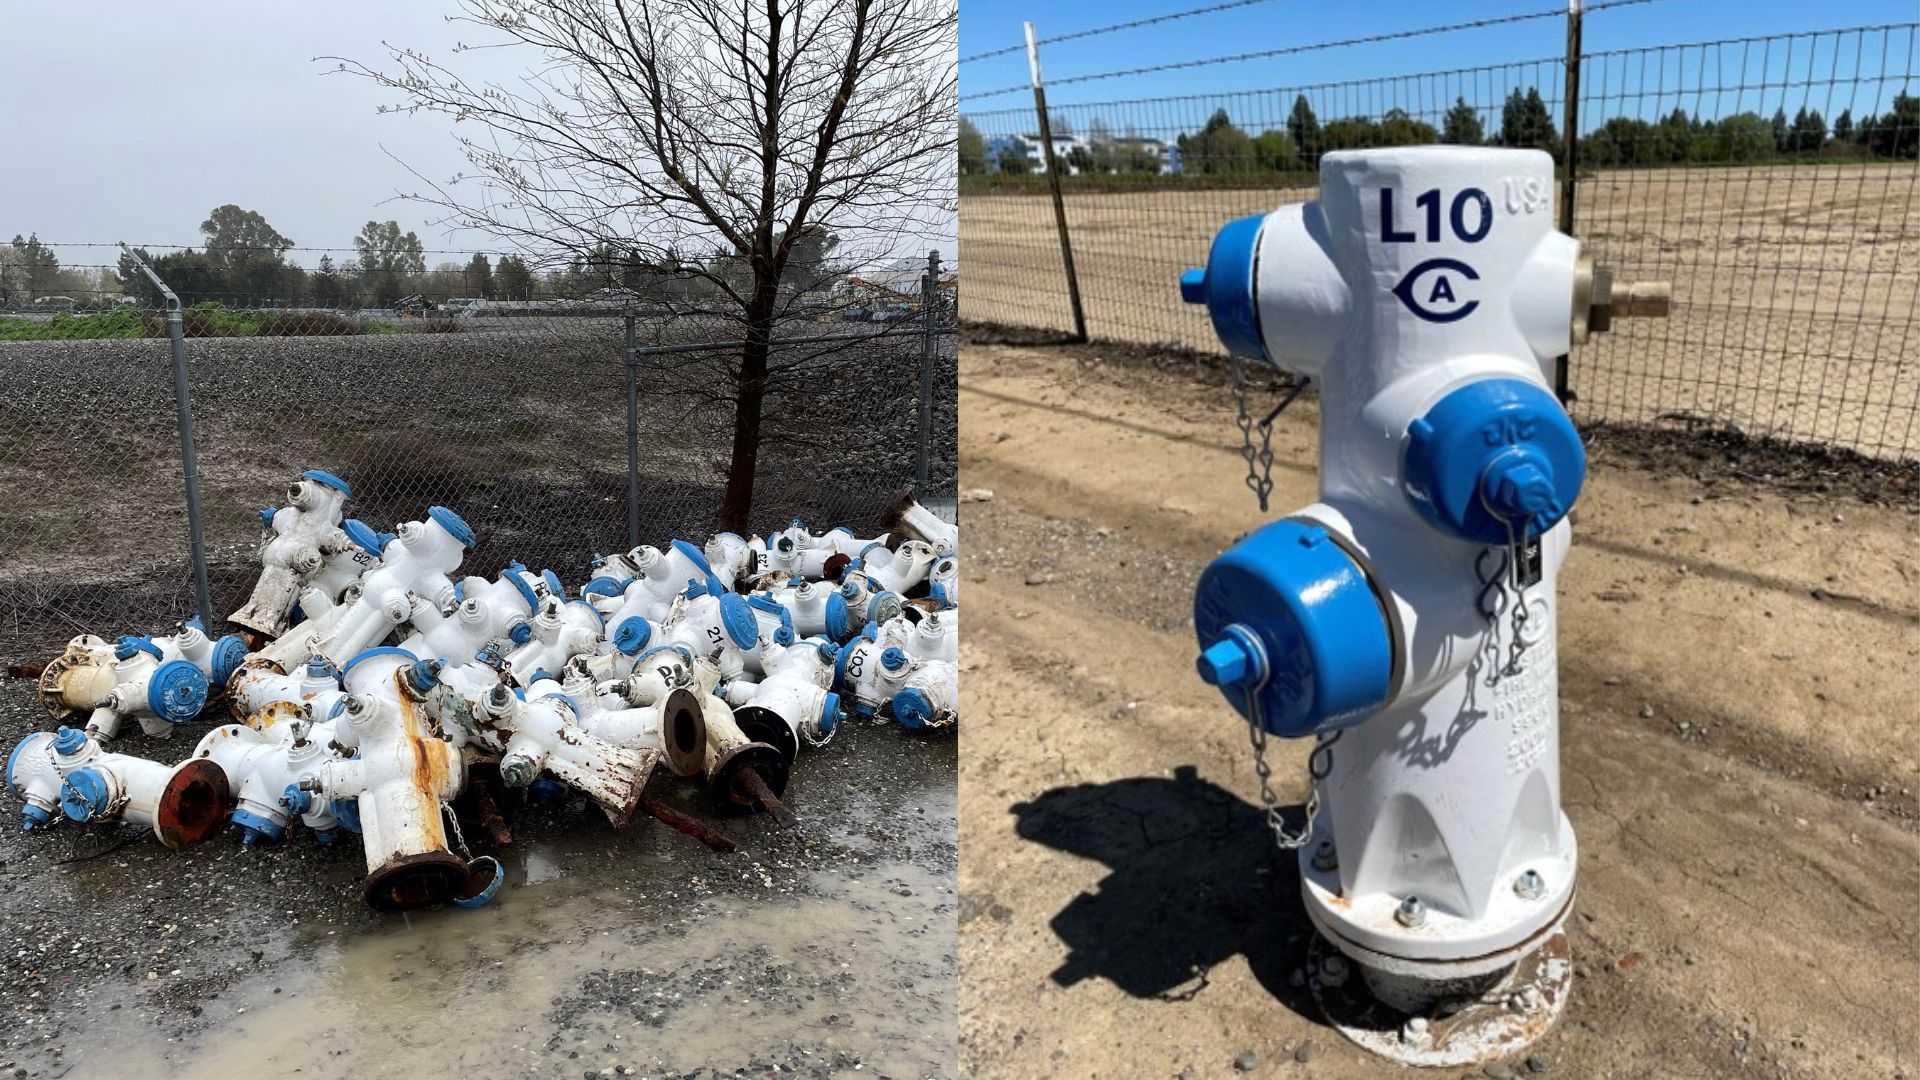 A pile of old fire hydrants on the left compared to a new, more reliable, fire hydrant on the right.